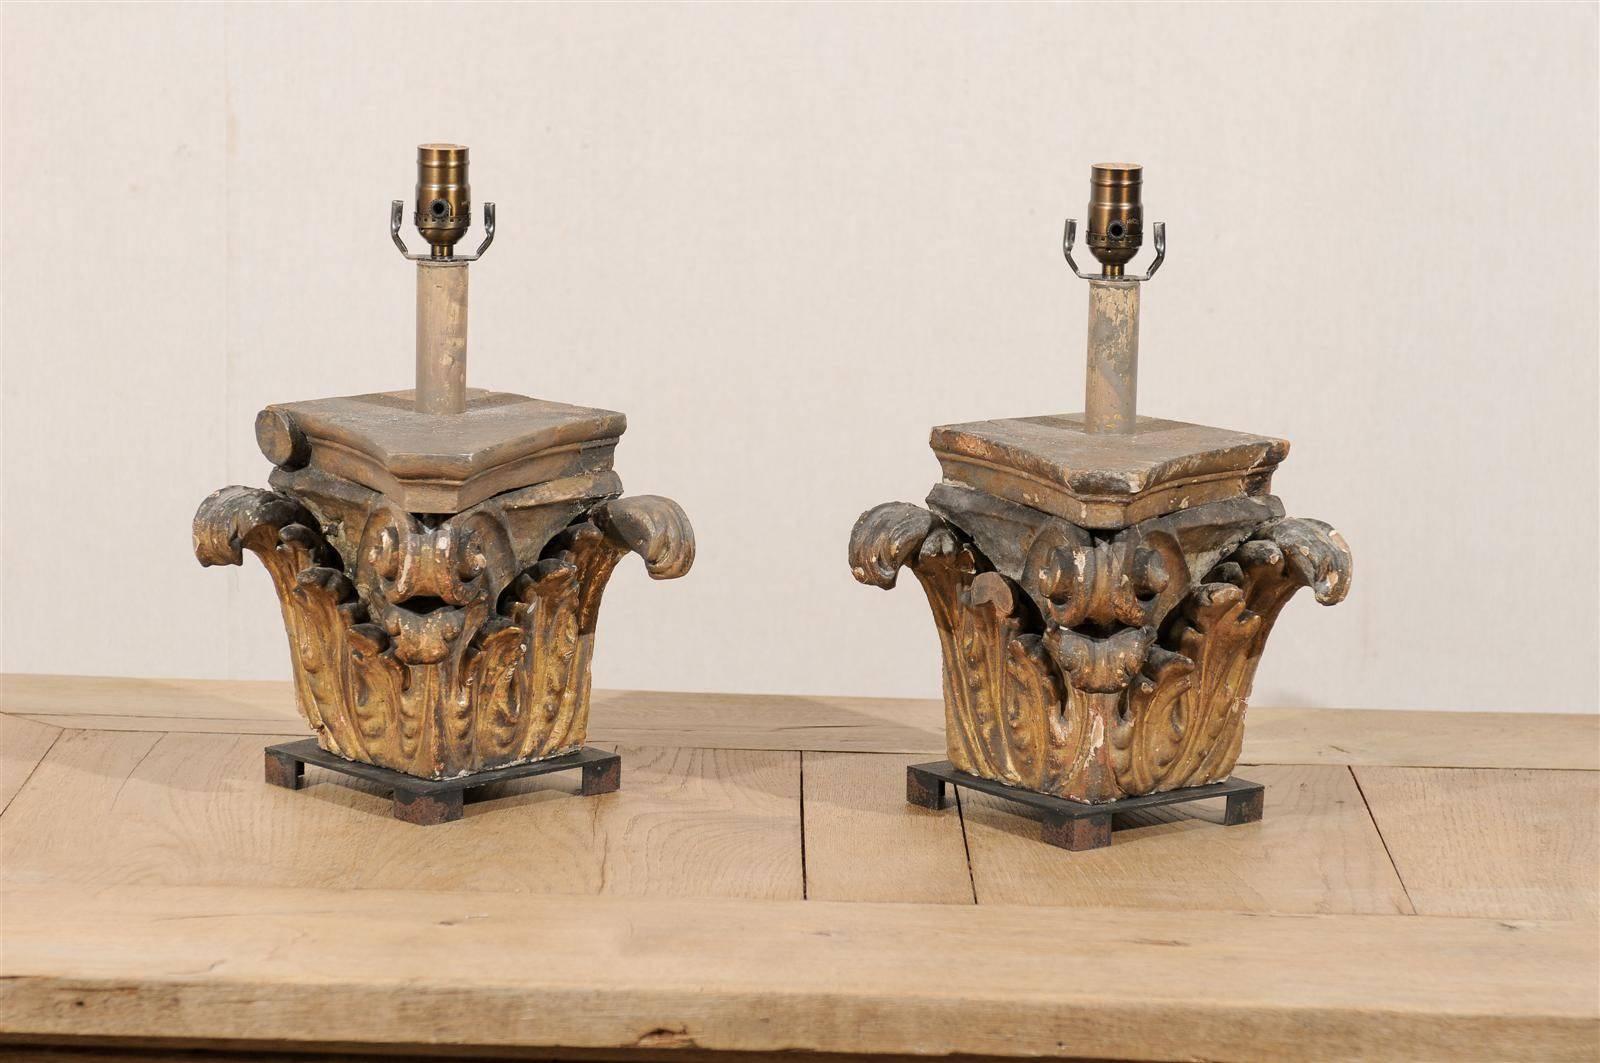 Painted Pair of 19th C Italian Wooden Corinthian Capital Fragments Made into Table Lamps